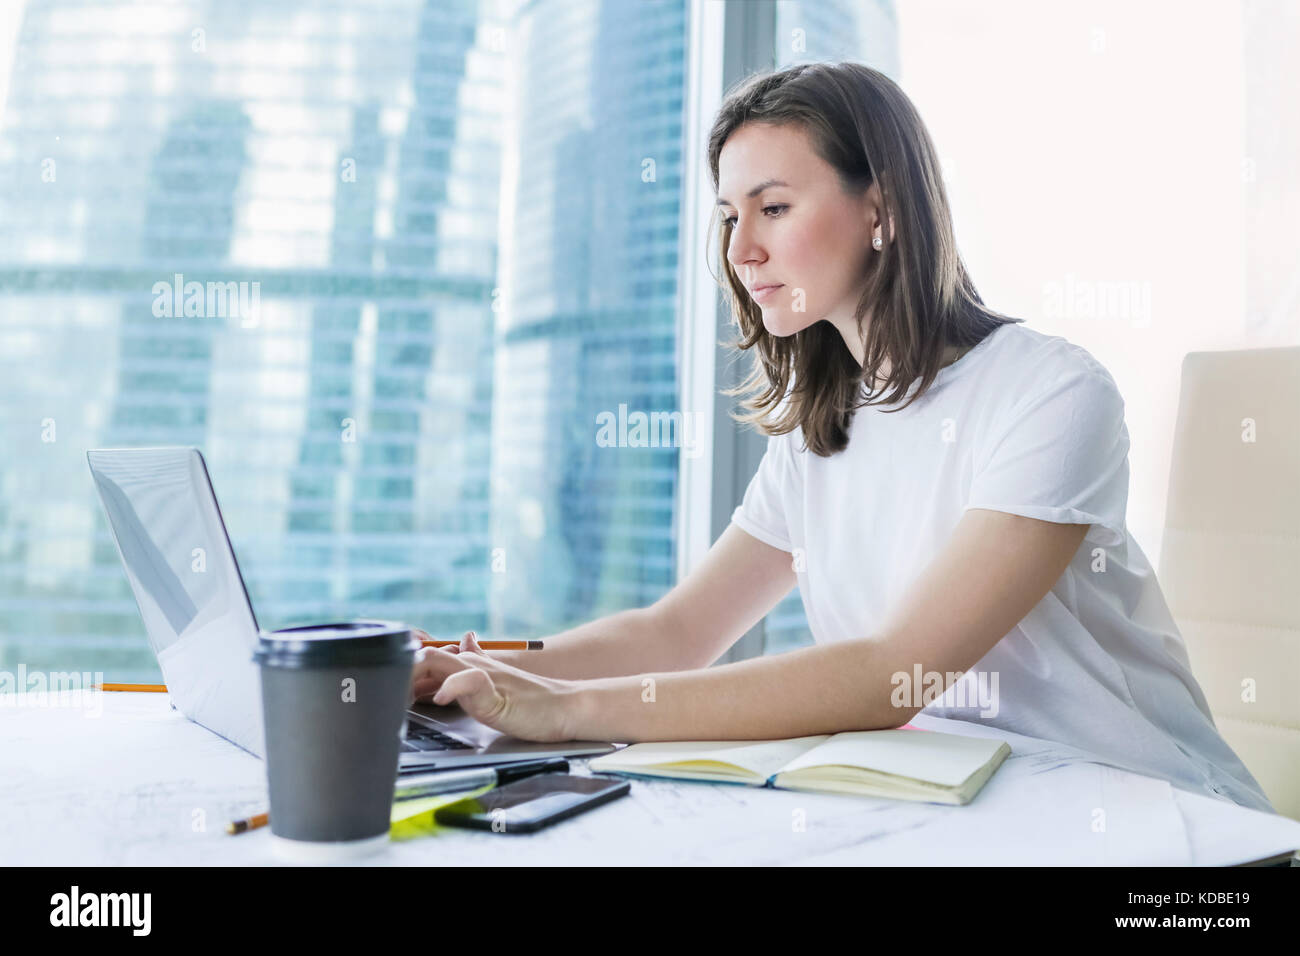 Young woman working on laptop at office Stock Photo